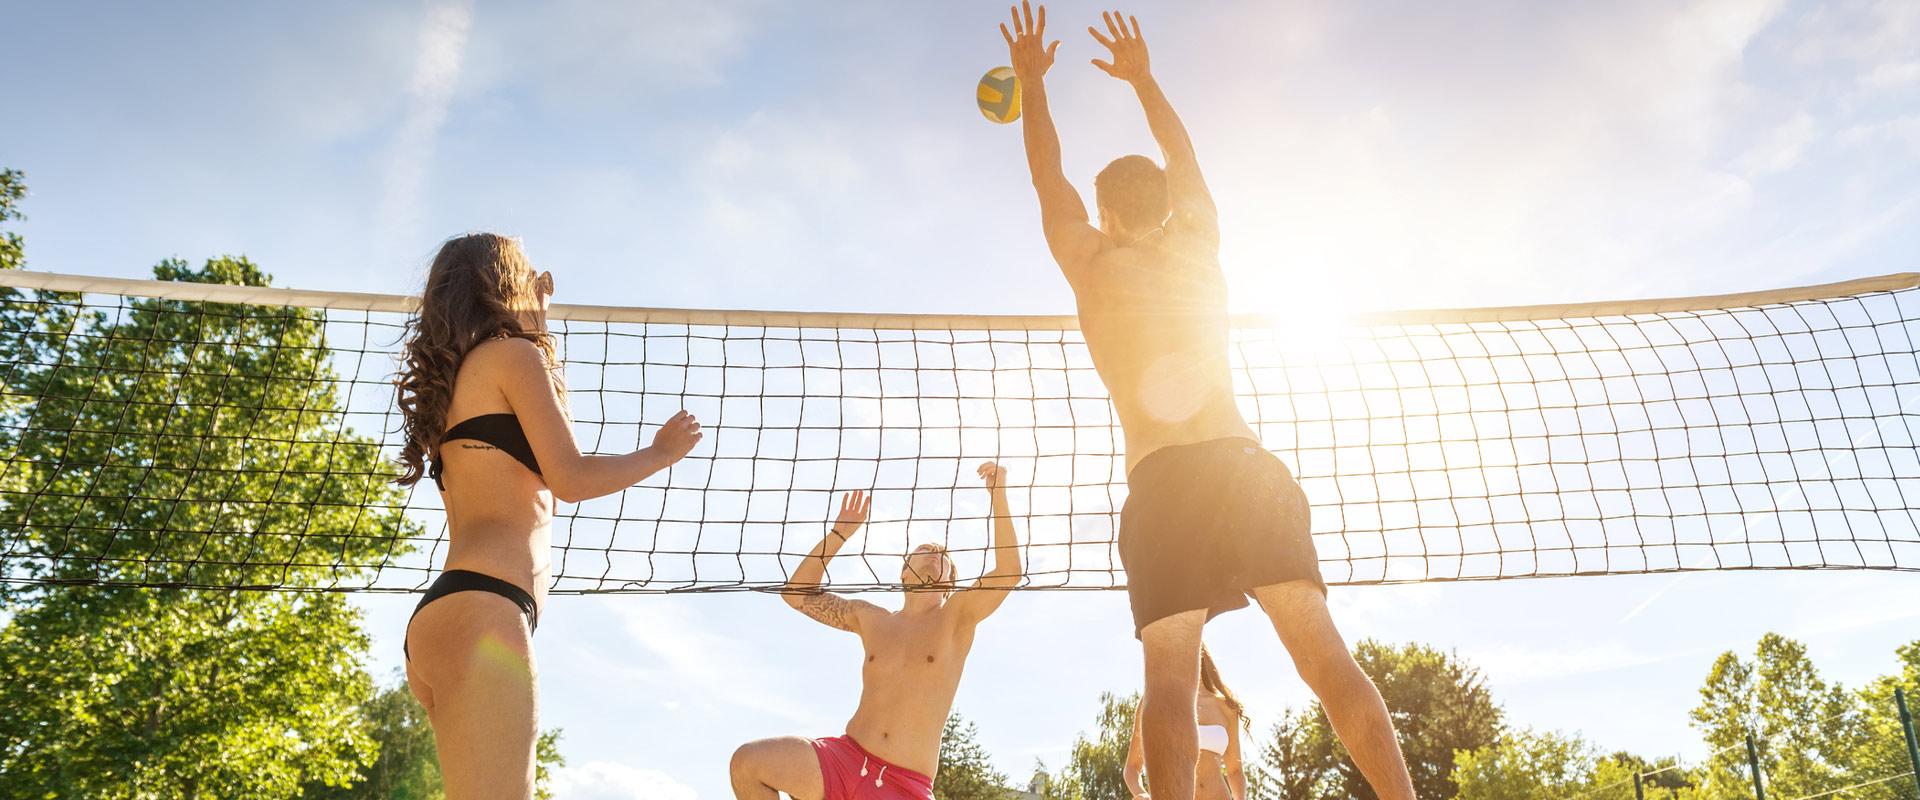 2021 SUMMER SAND VOLLEYBALL SIGN UP